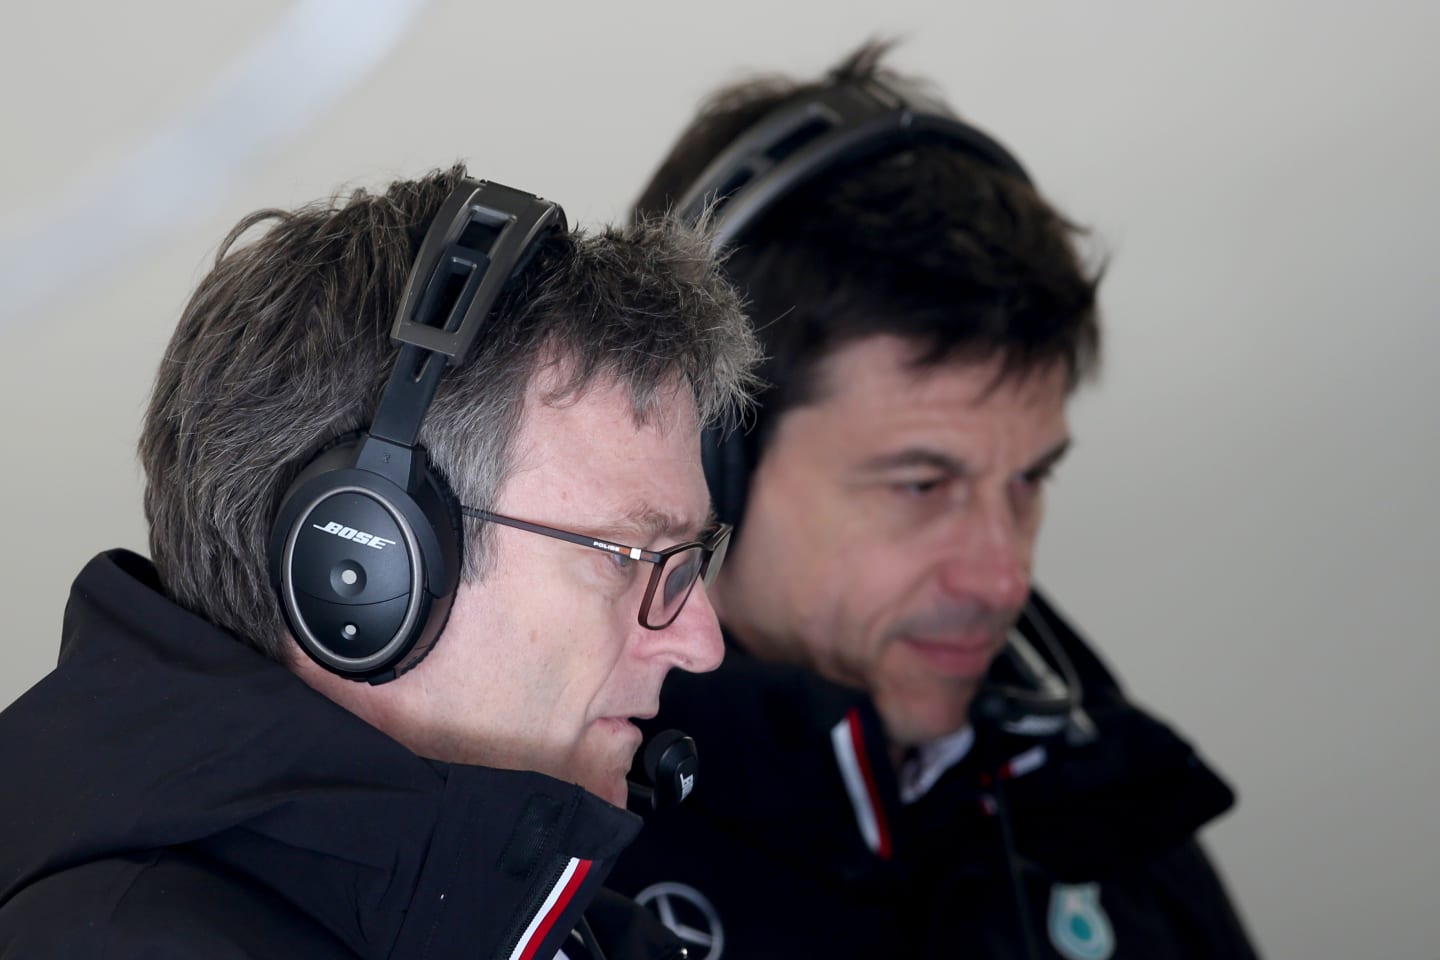 BARCELONA, SPAIN - FEBRUARY 20: James Allison, Technical Director at Mercedes GP and Mercedes GP